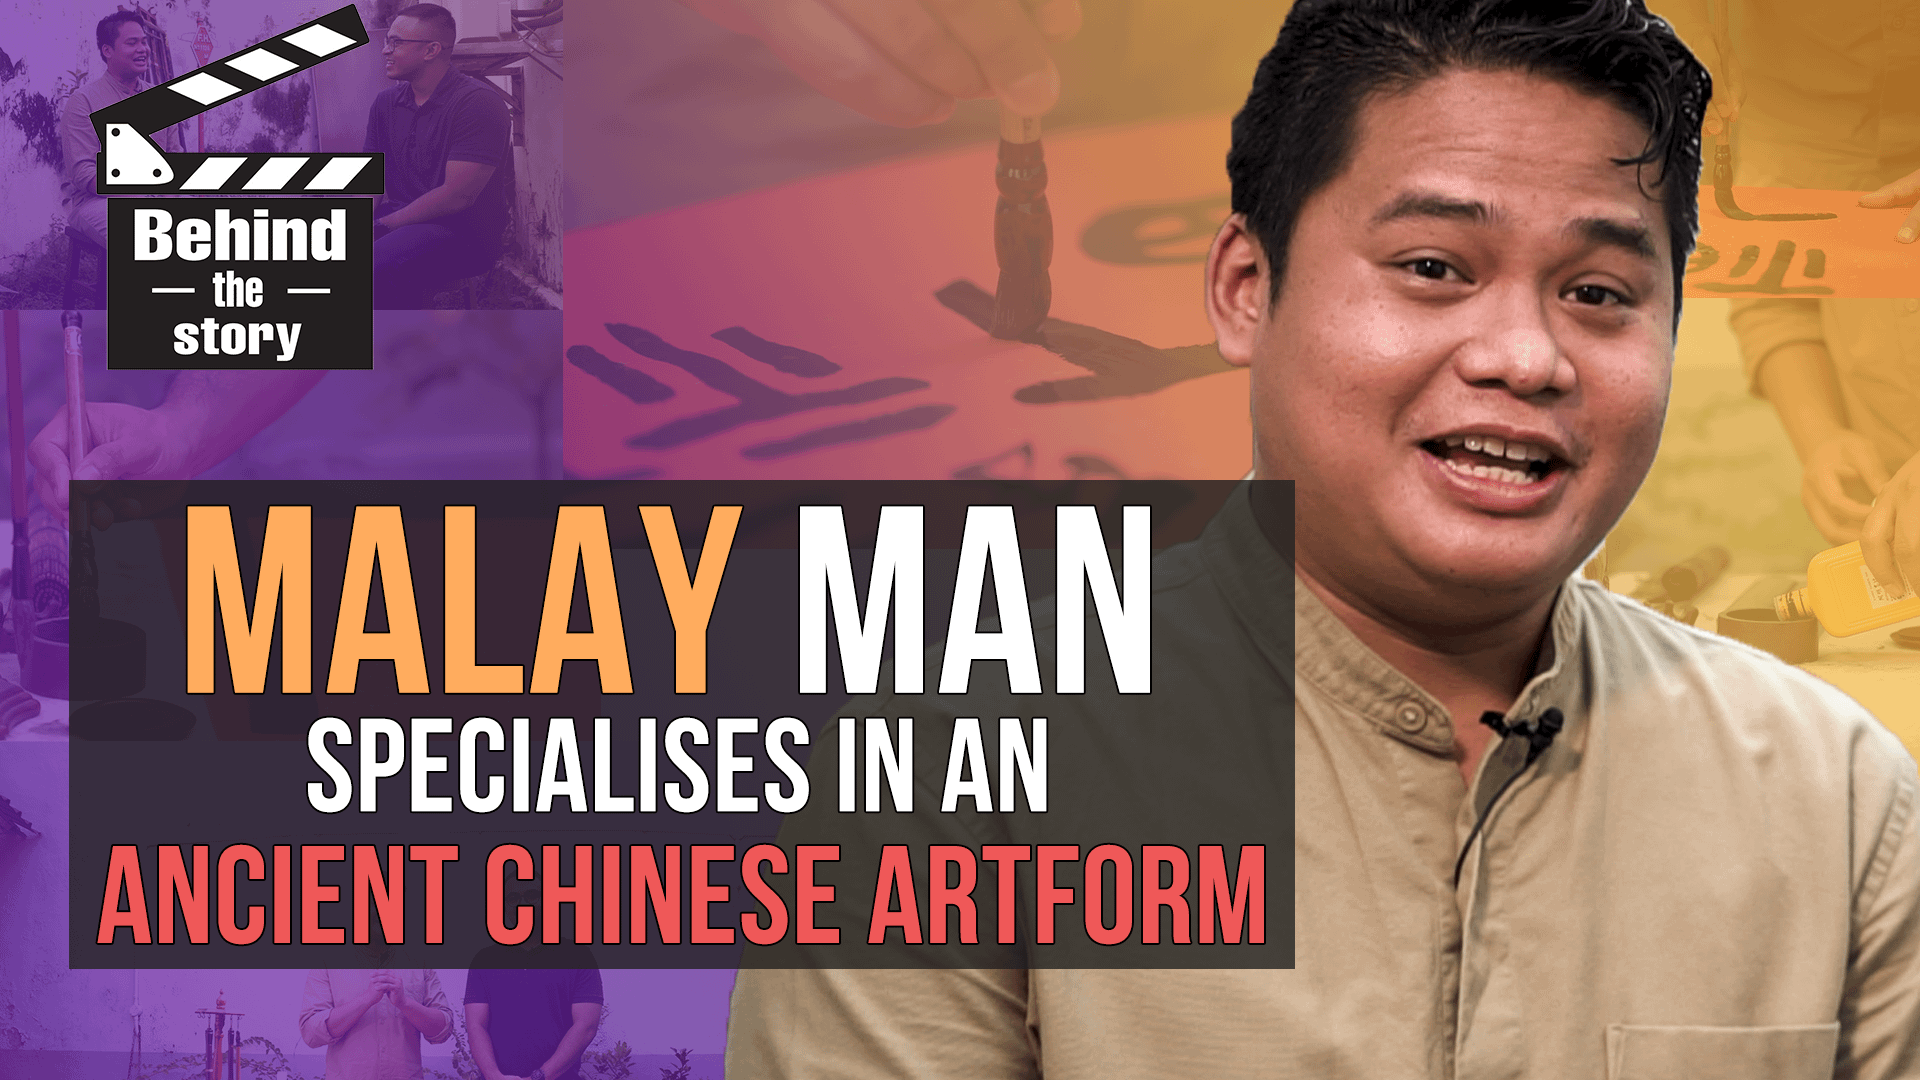 This Malay man specialises in an Ancient Chinese artform